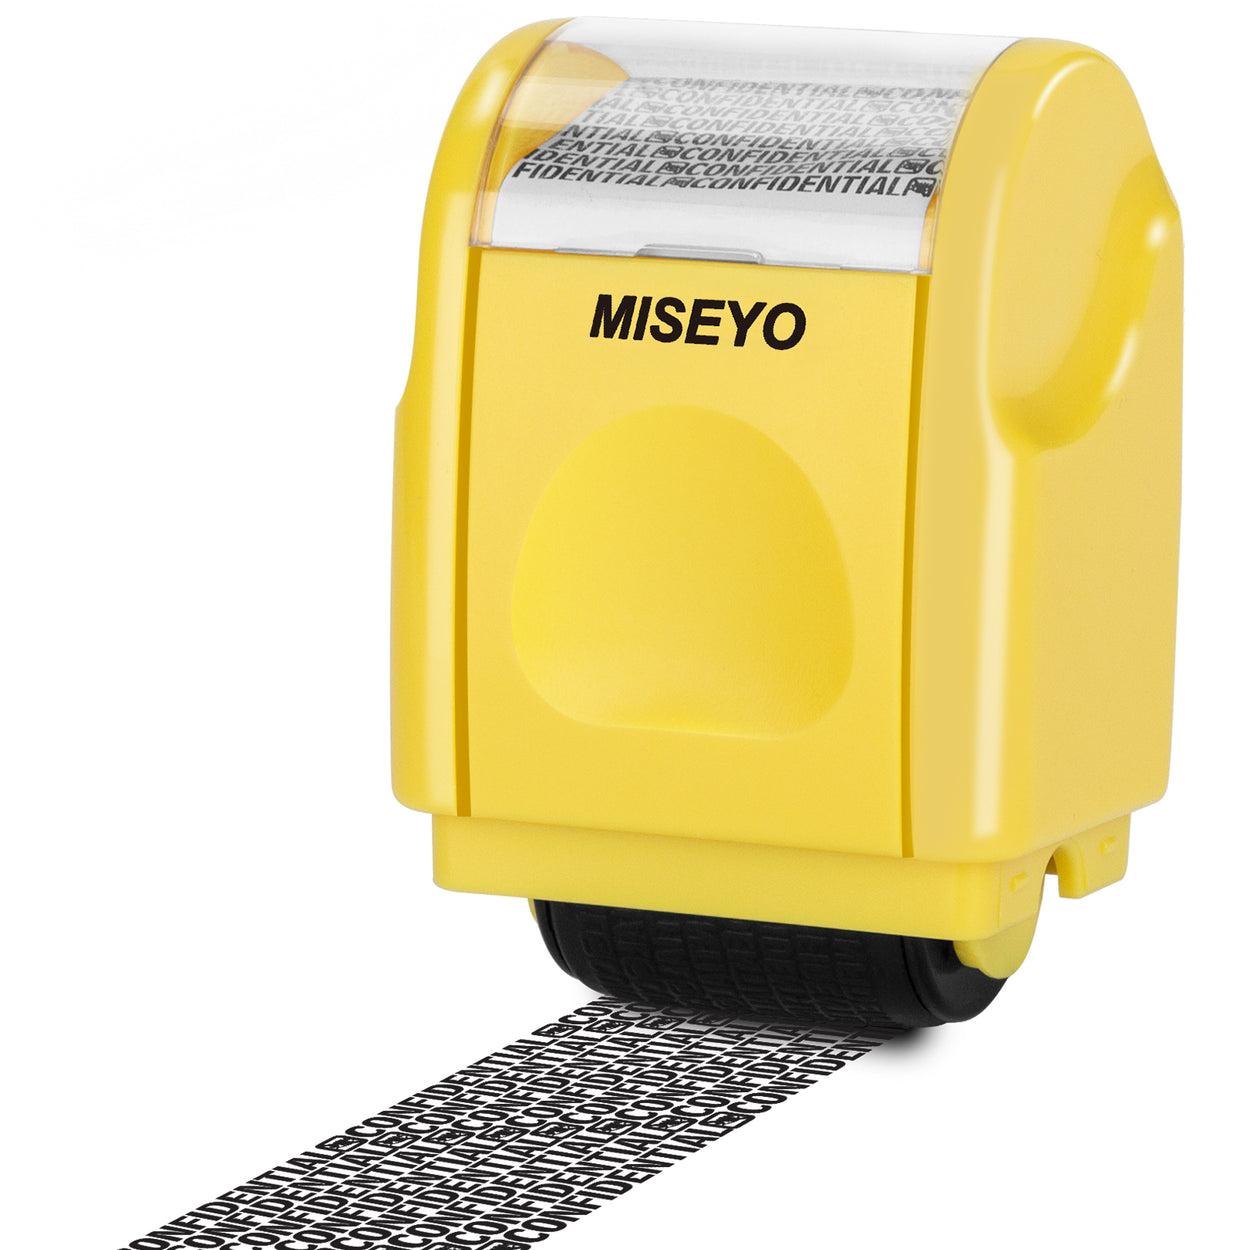 Miseyo Mini Identity Theft Protection Roller Stamp - Yellow